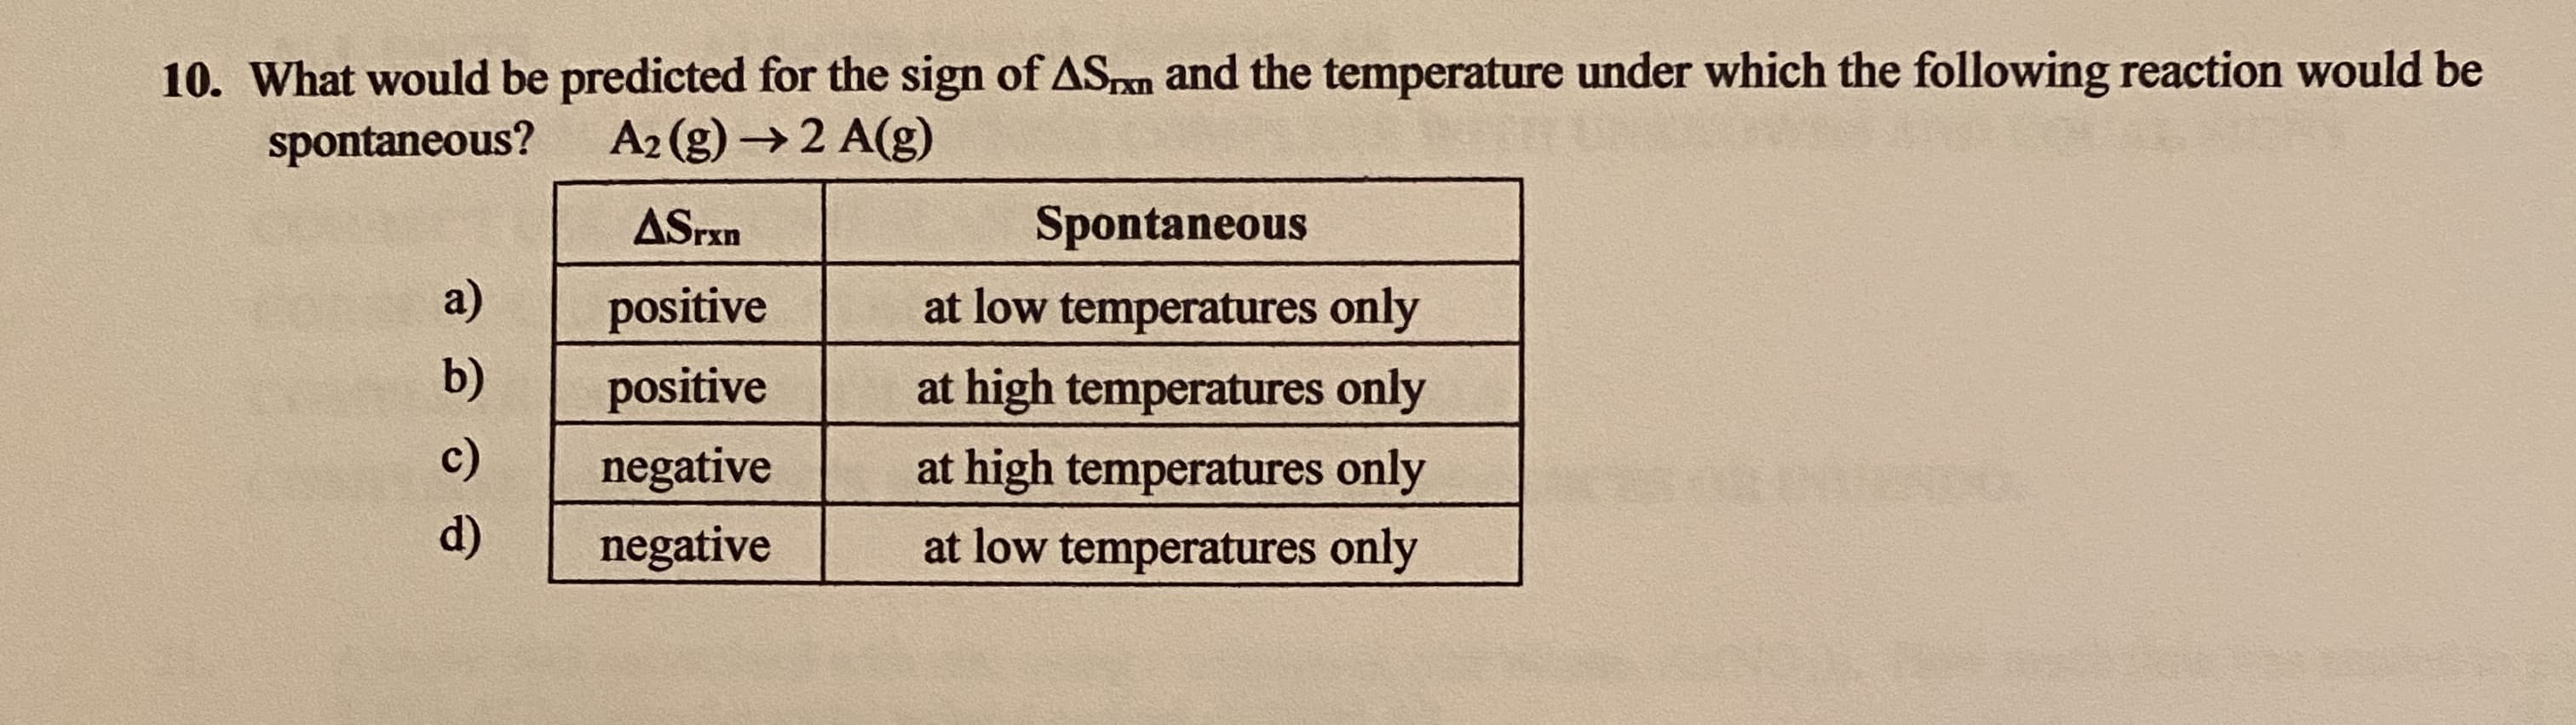 10. What would be predicted for the sign of ASpn and the temperature under which the following reaction would be
spontaneous?
A2 (g) →2 A(g)
ASrxn
Spontaneous
a)
positive
at low temperatures only
b)
positive
at high temperatures only
c)
negative
at high temperatures only
d)
negative
at low temperatures only
